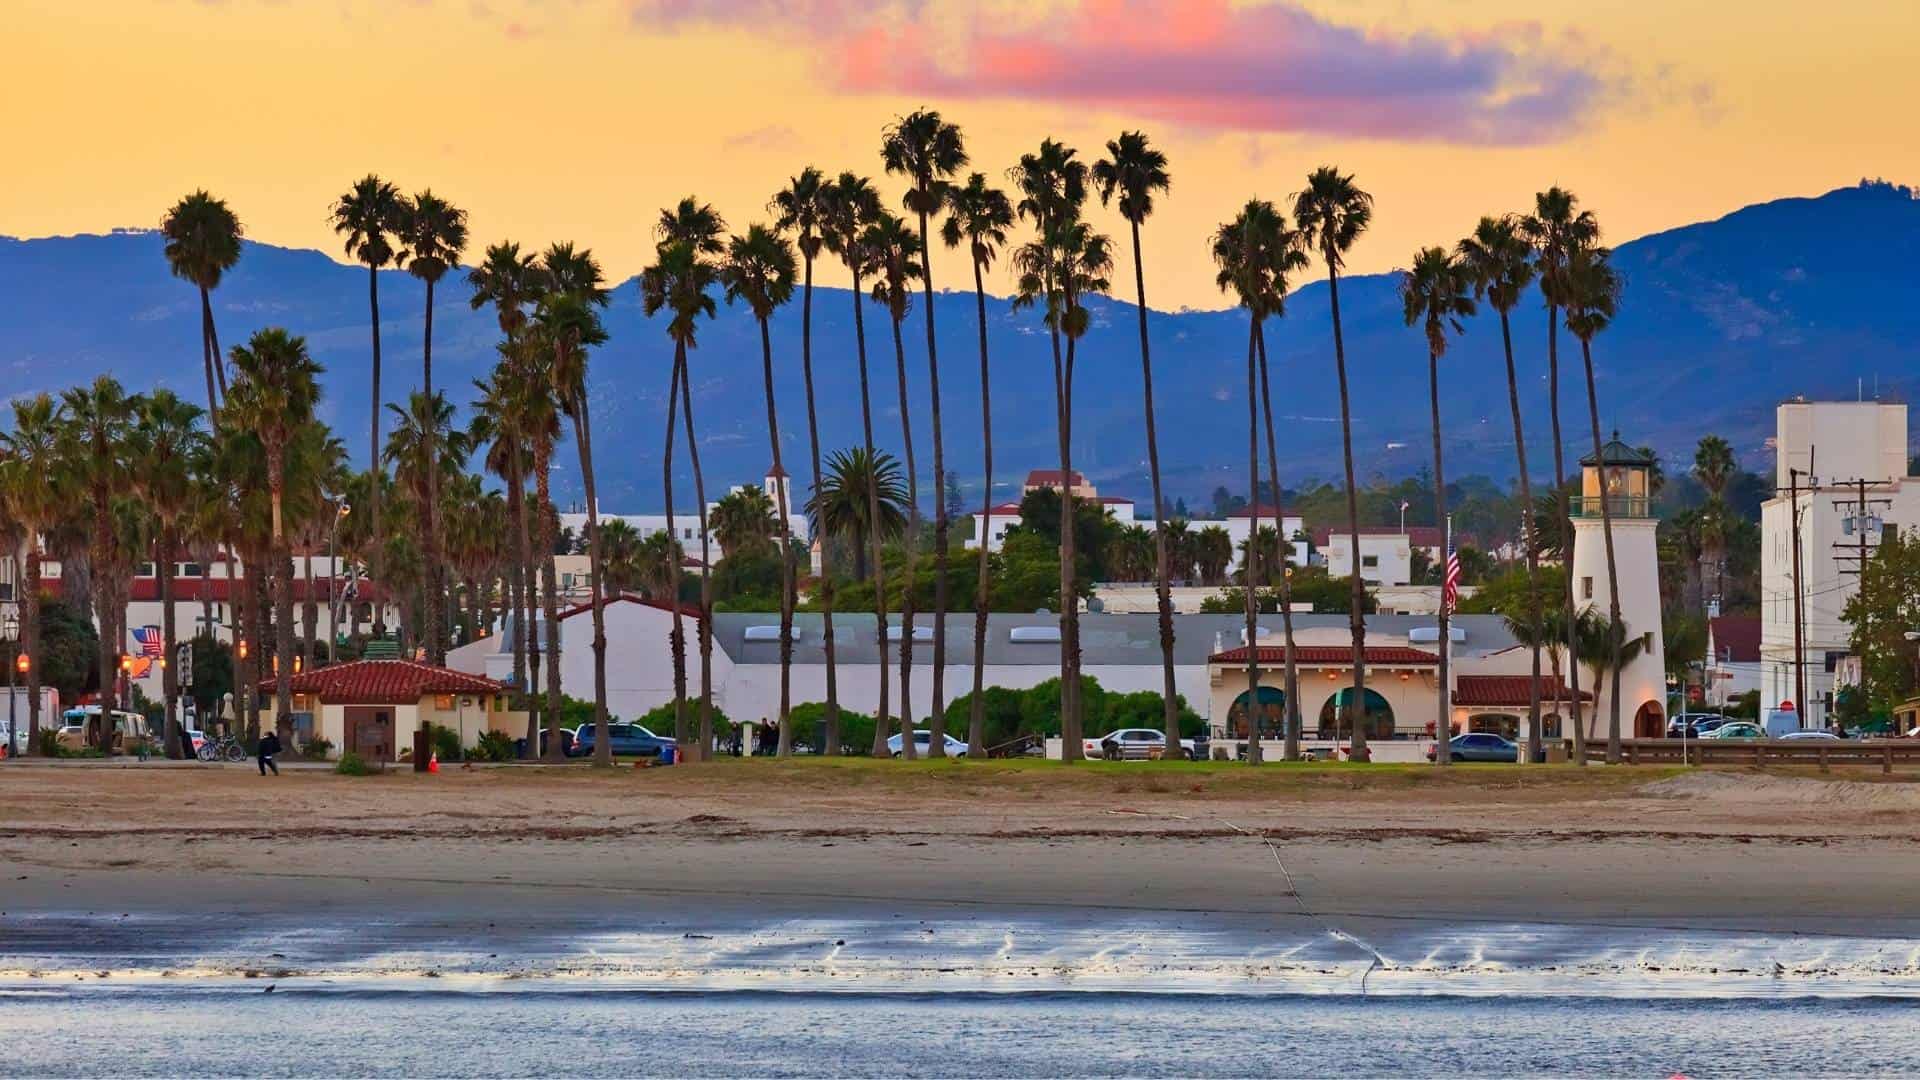 Over 25 of the Best Things to do in Santa Barbara with Kids